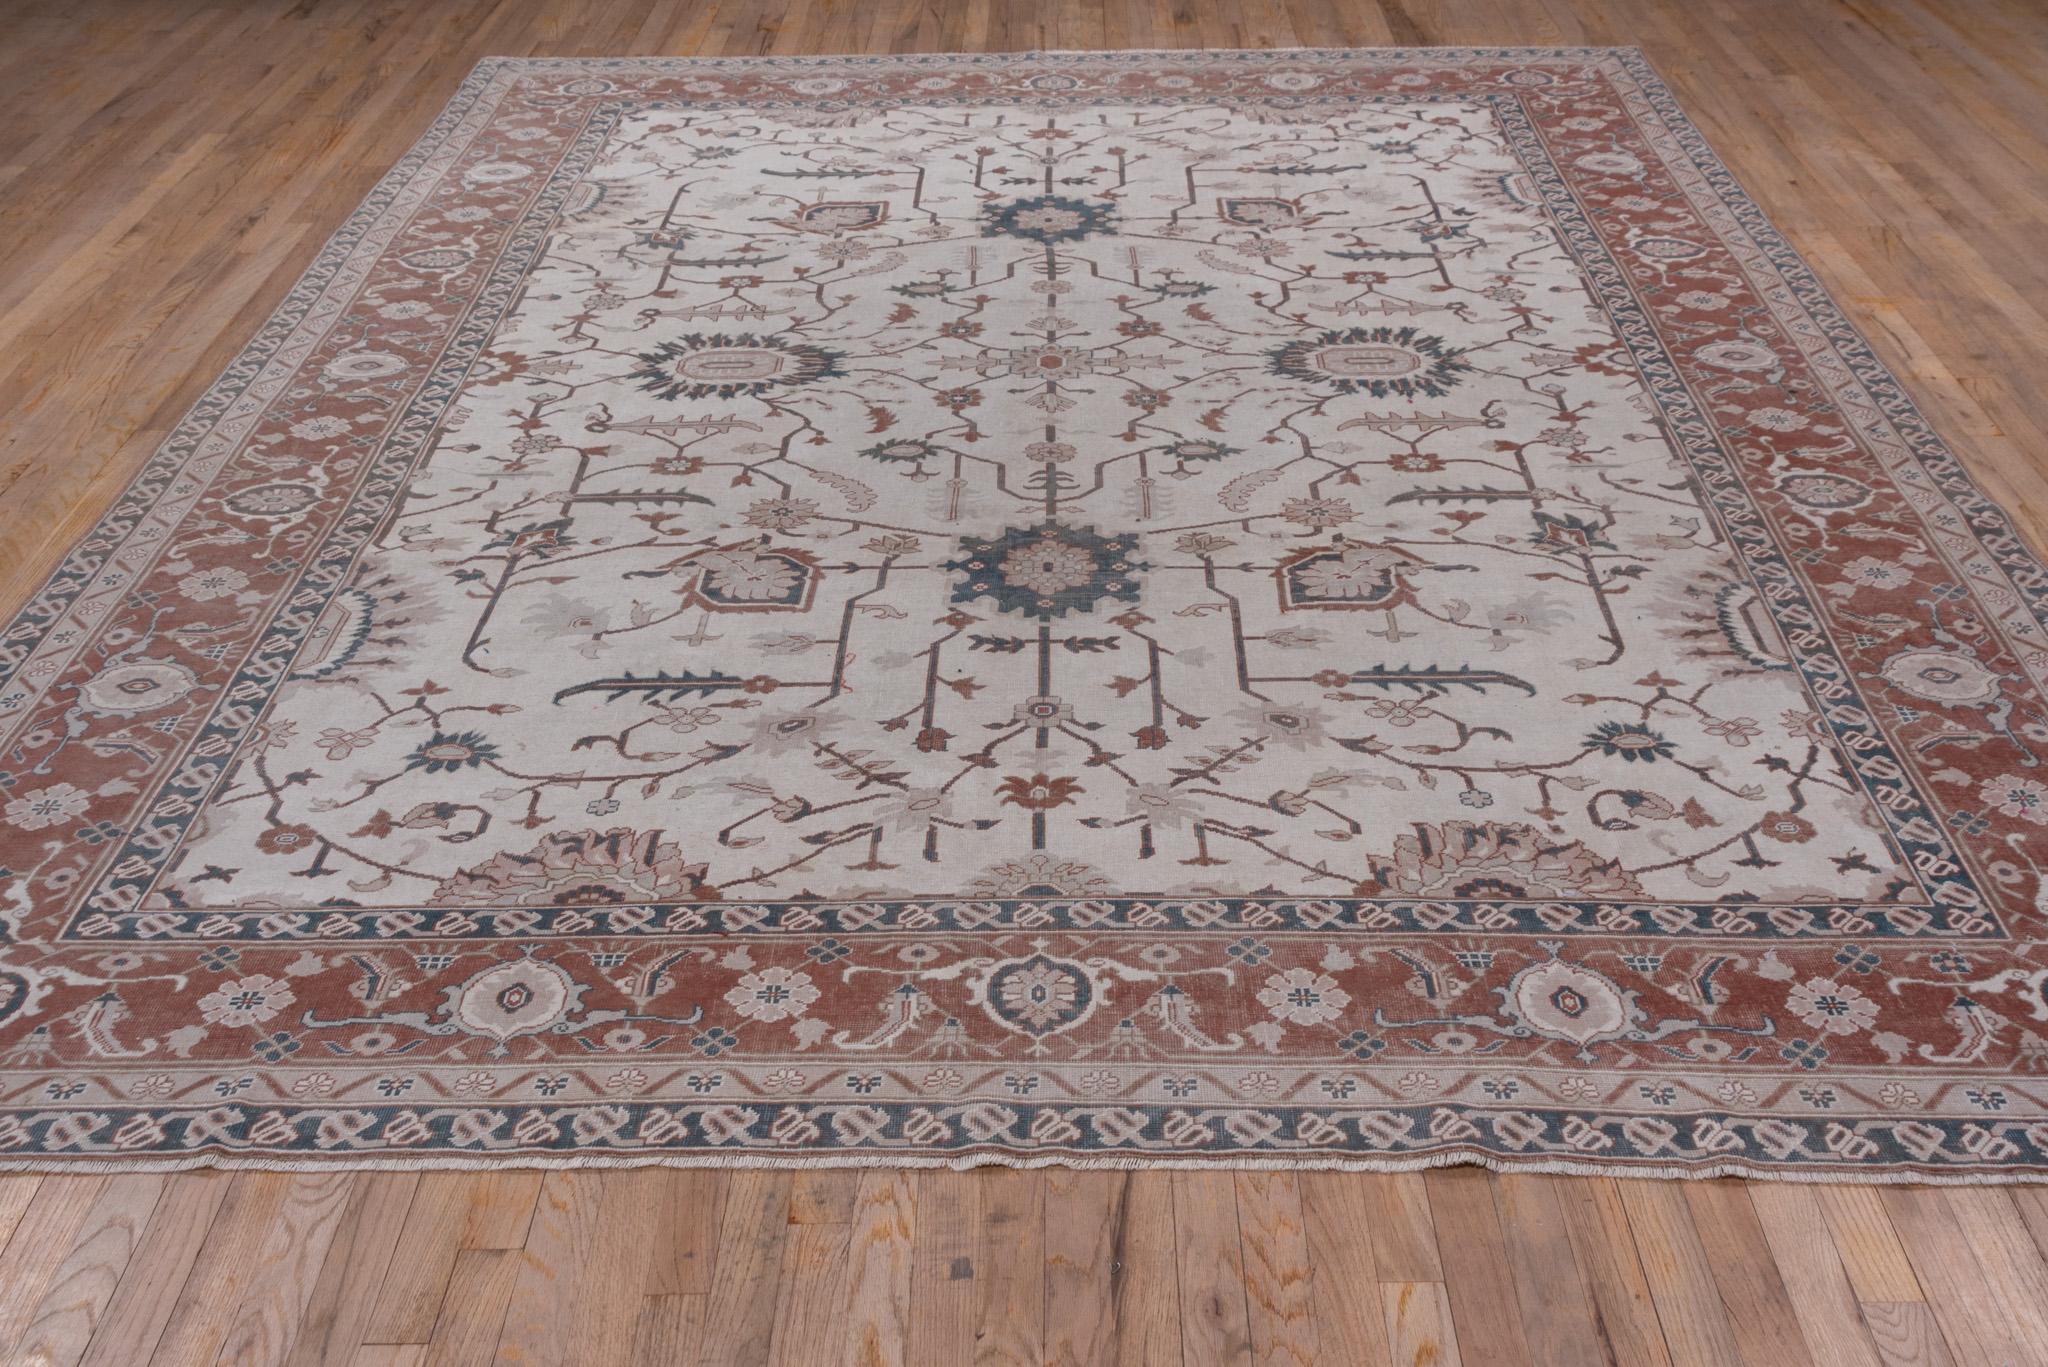 An Oushak Rug circa 1930. Hand Knotted, made of 100% wool yarn. 